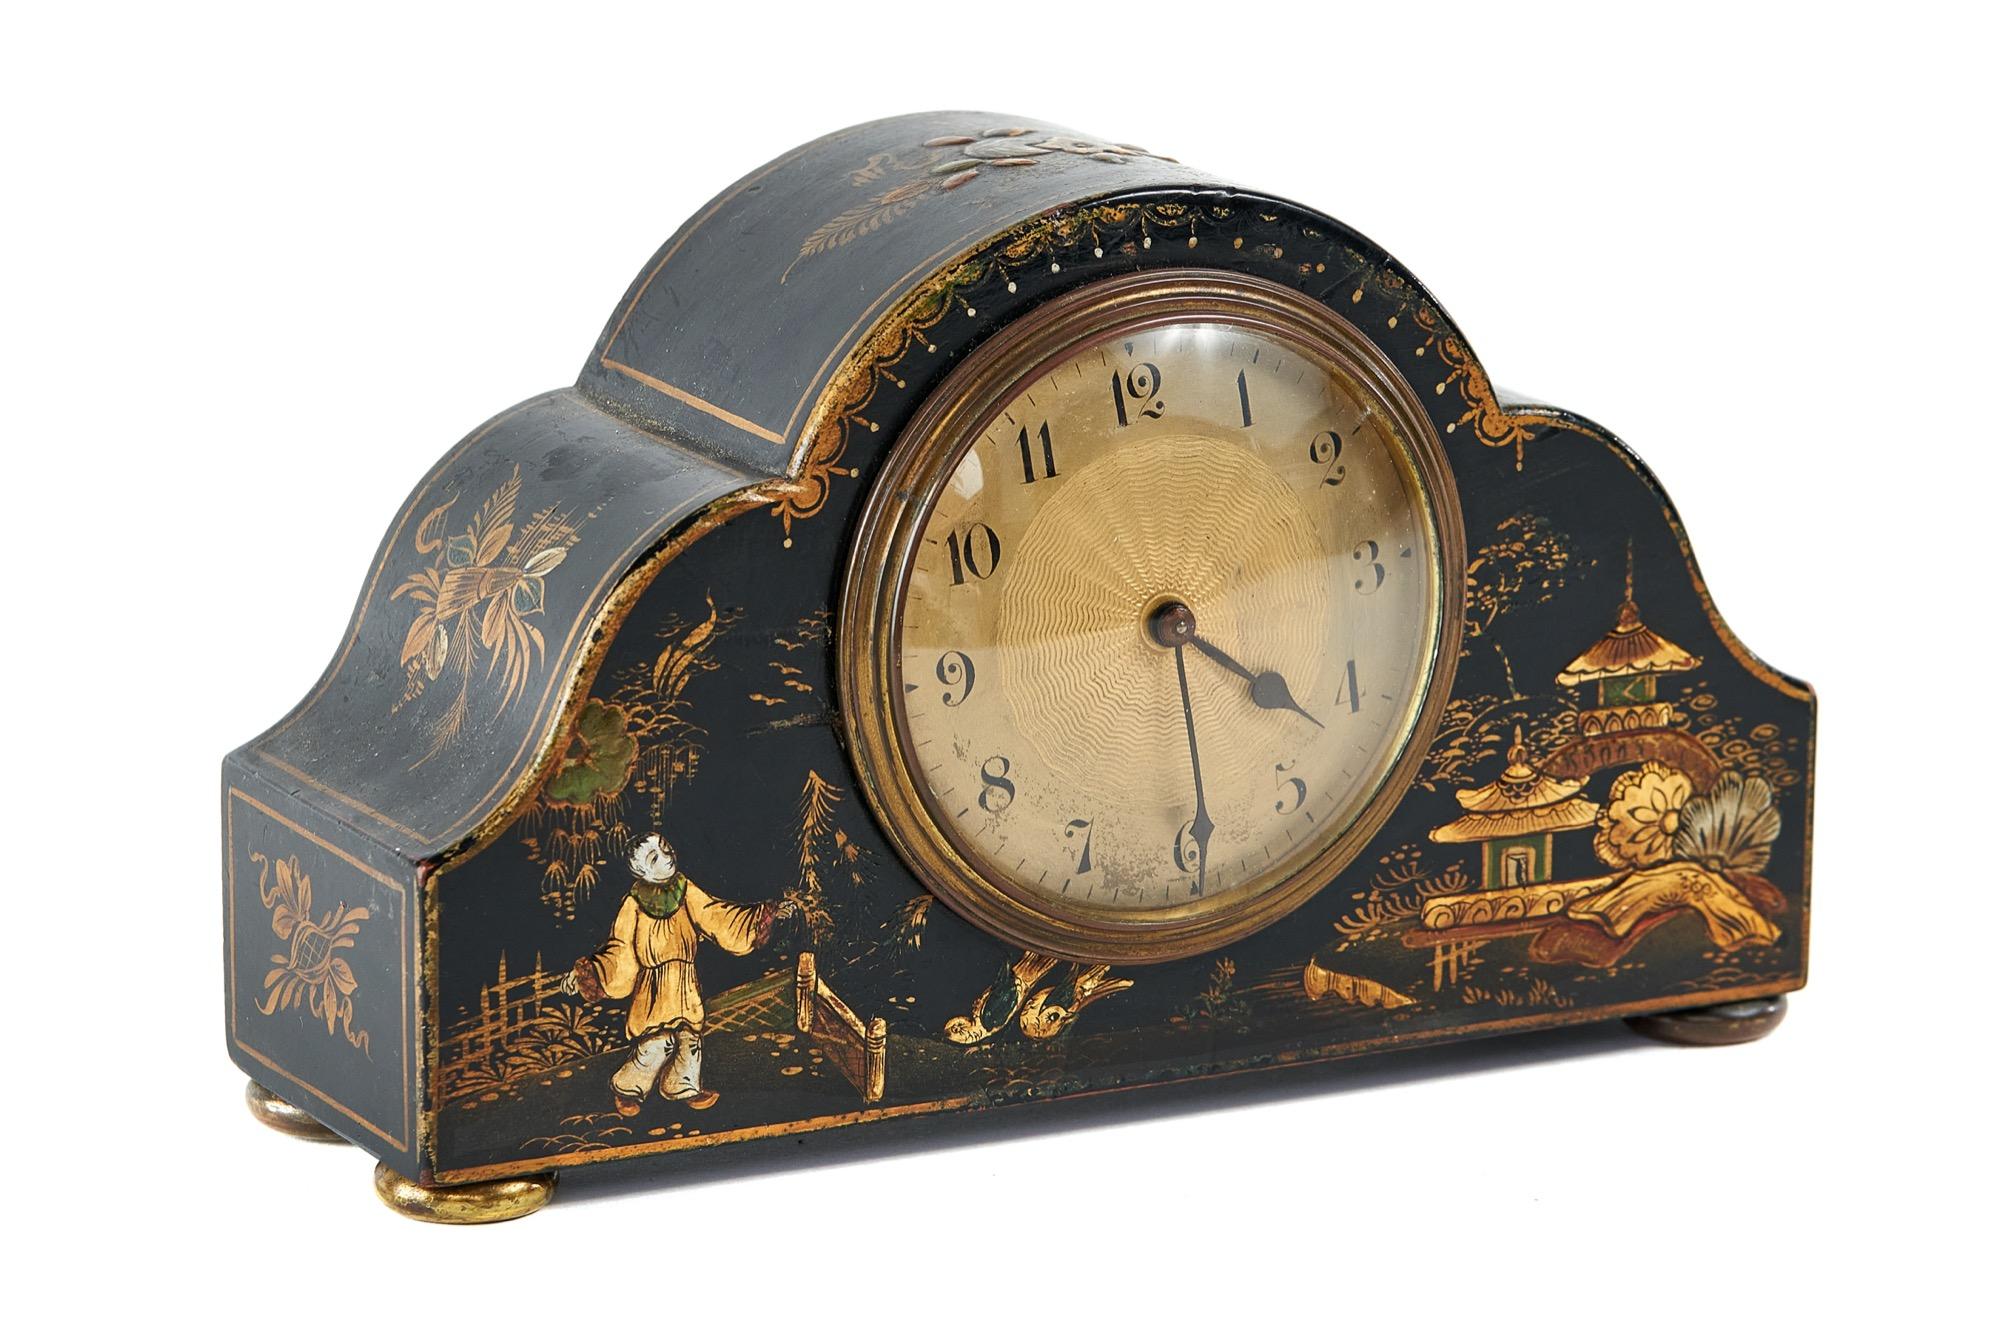 Black chinoiserie decorated mantel clock, circa 1920s.
 Gold plated dial with circular centre with engine turned detail.
Dome shaped glass with brass rim
8 day French movement. With key
recently serviced with key
keeps good time.